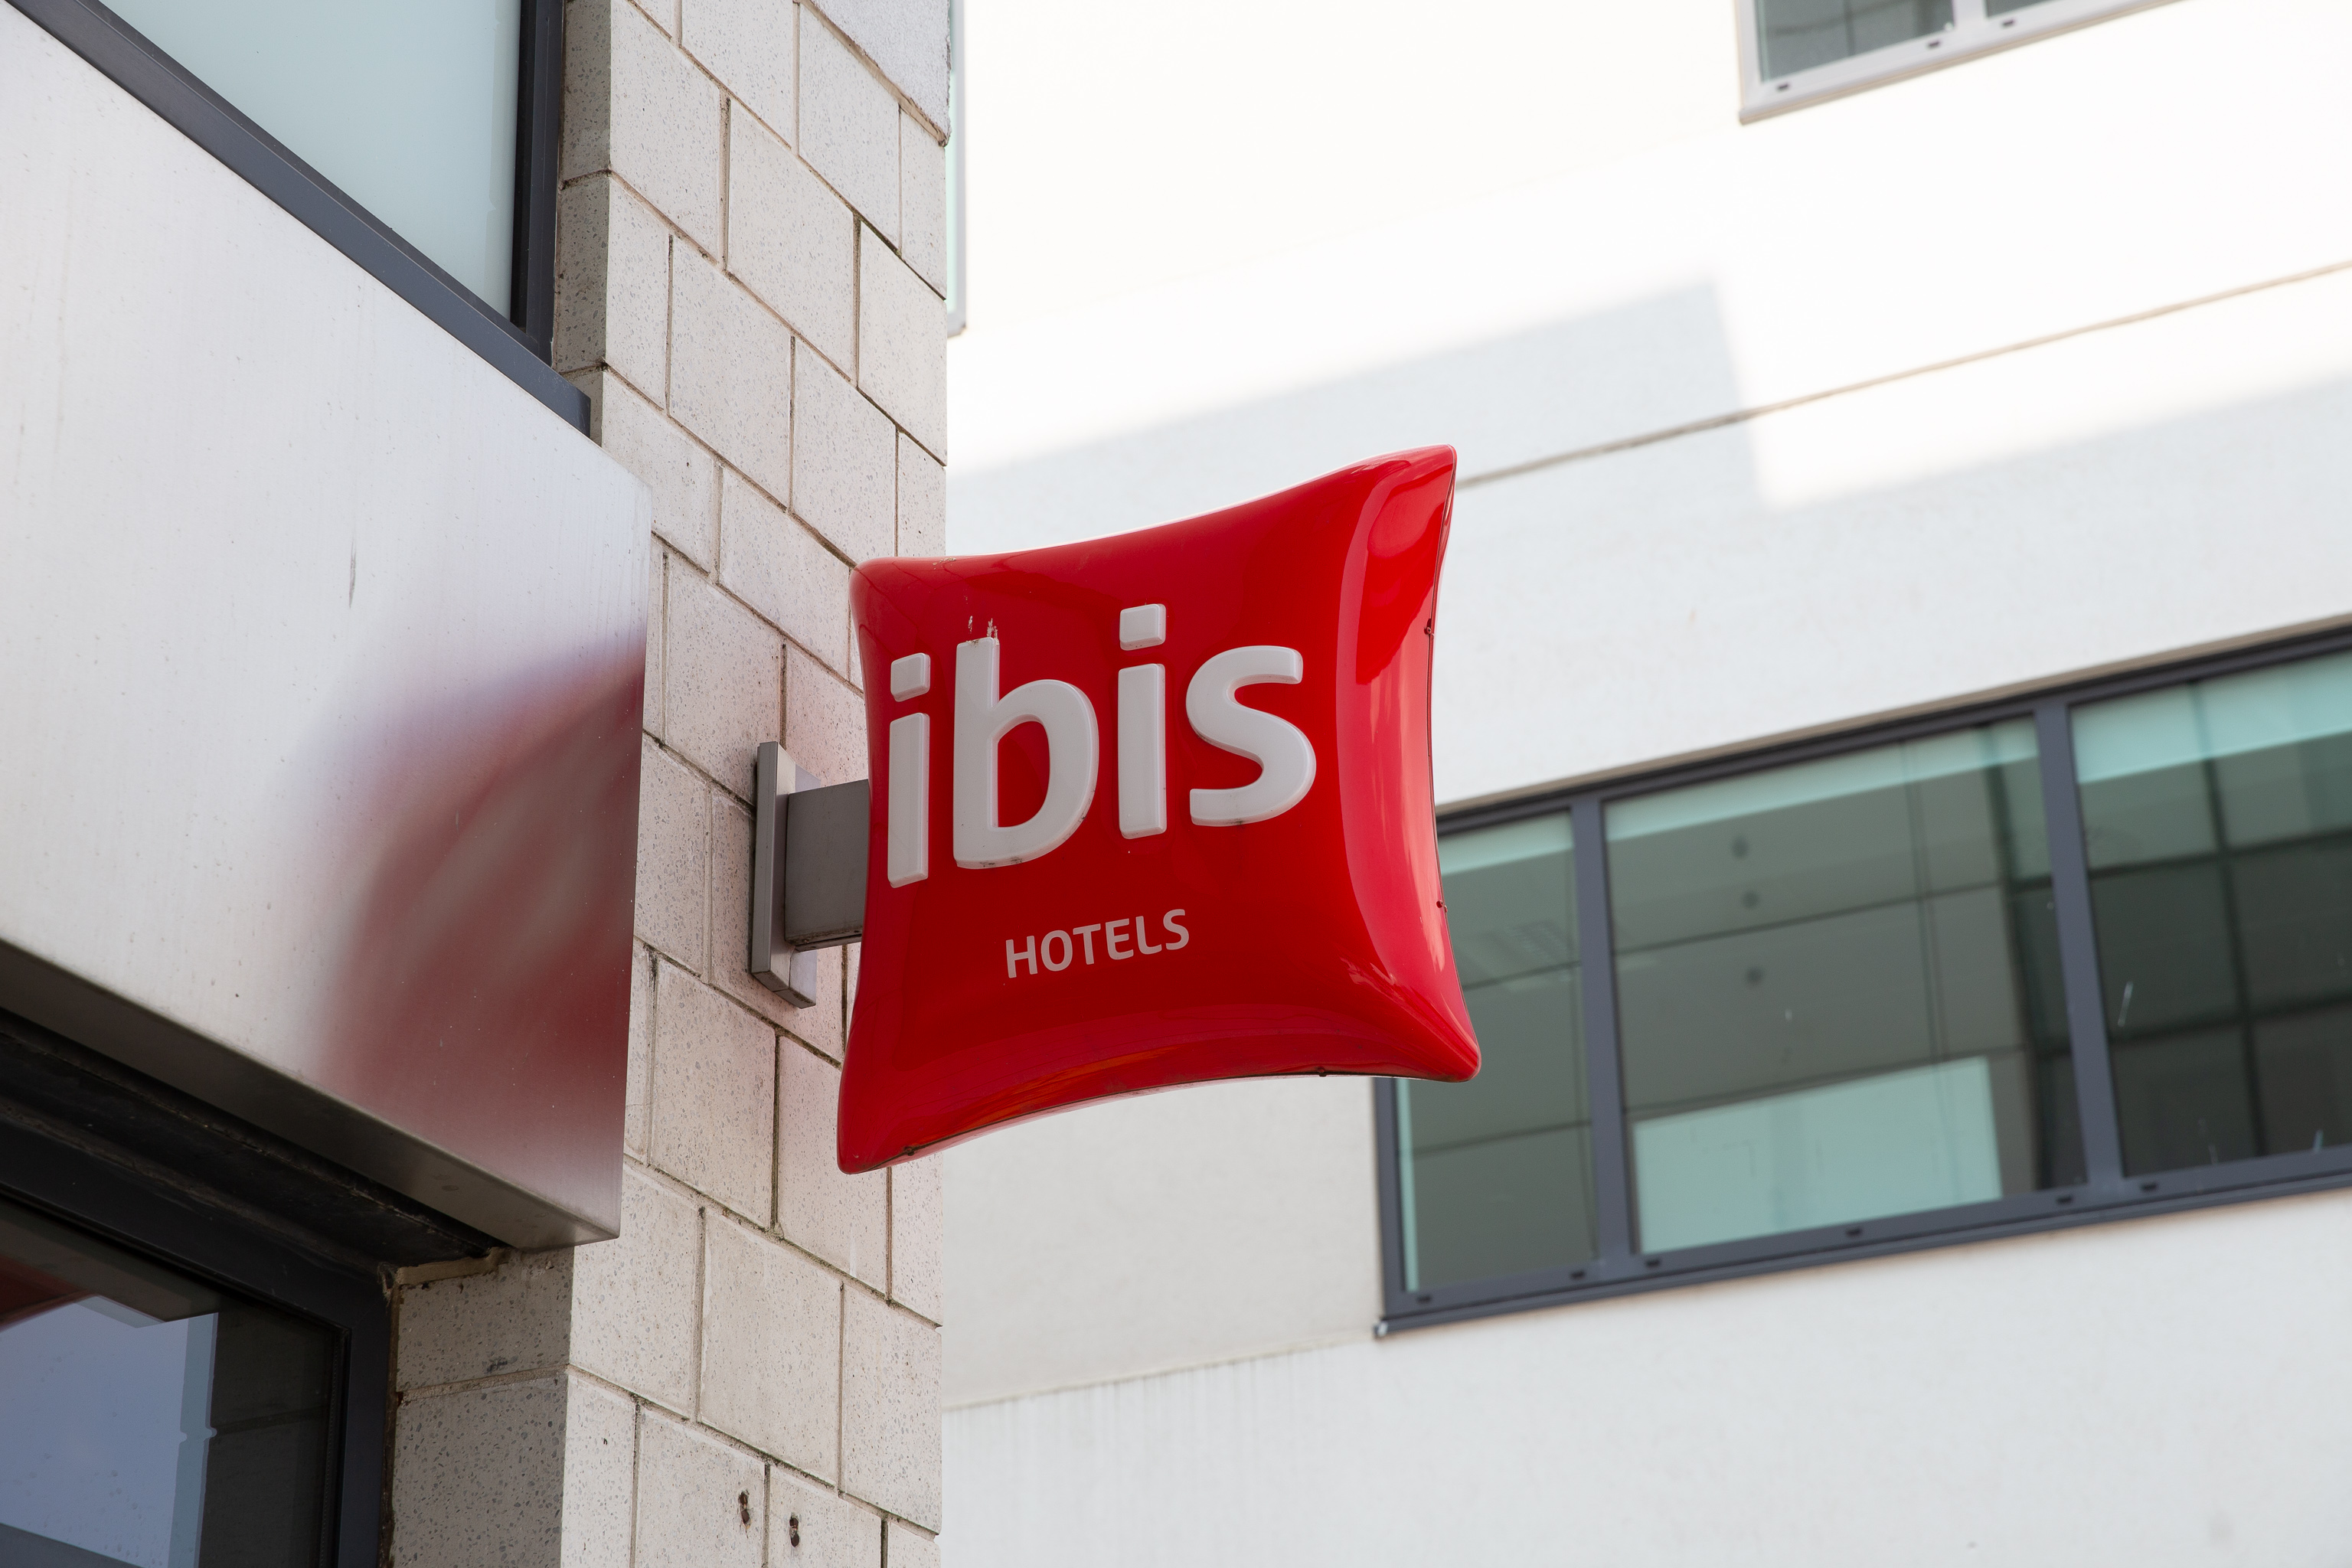 Ibis
I don't think I ever noticed that the Ibis logo was a pillow before.
